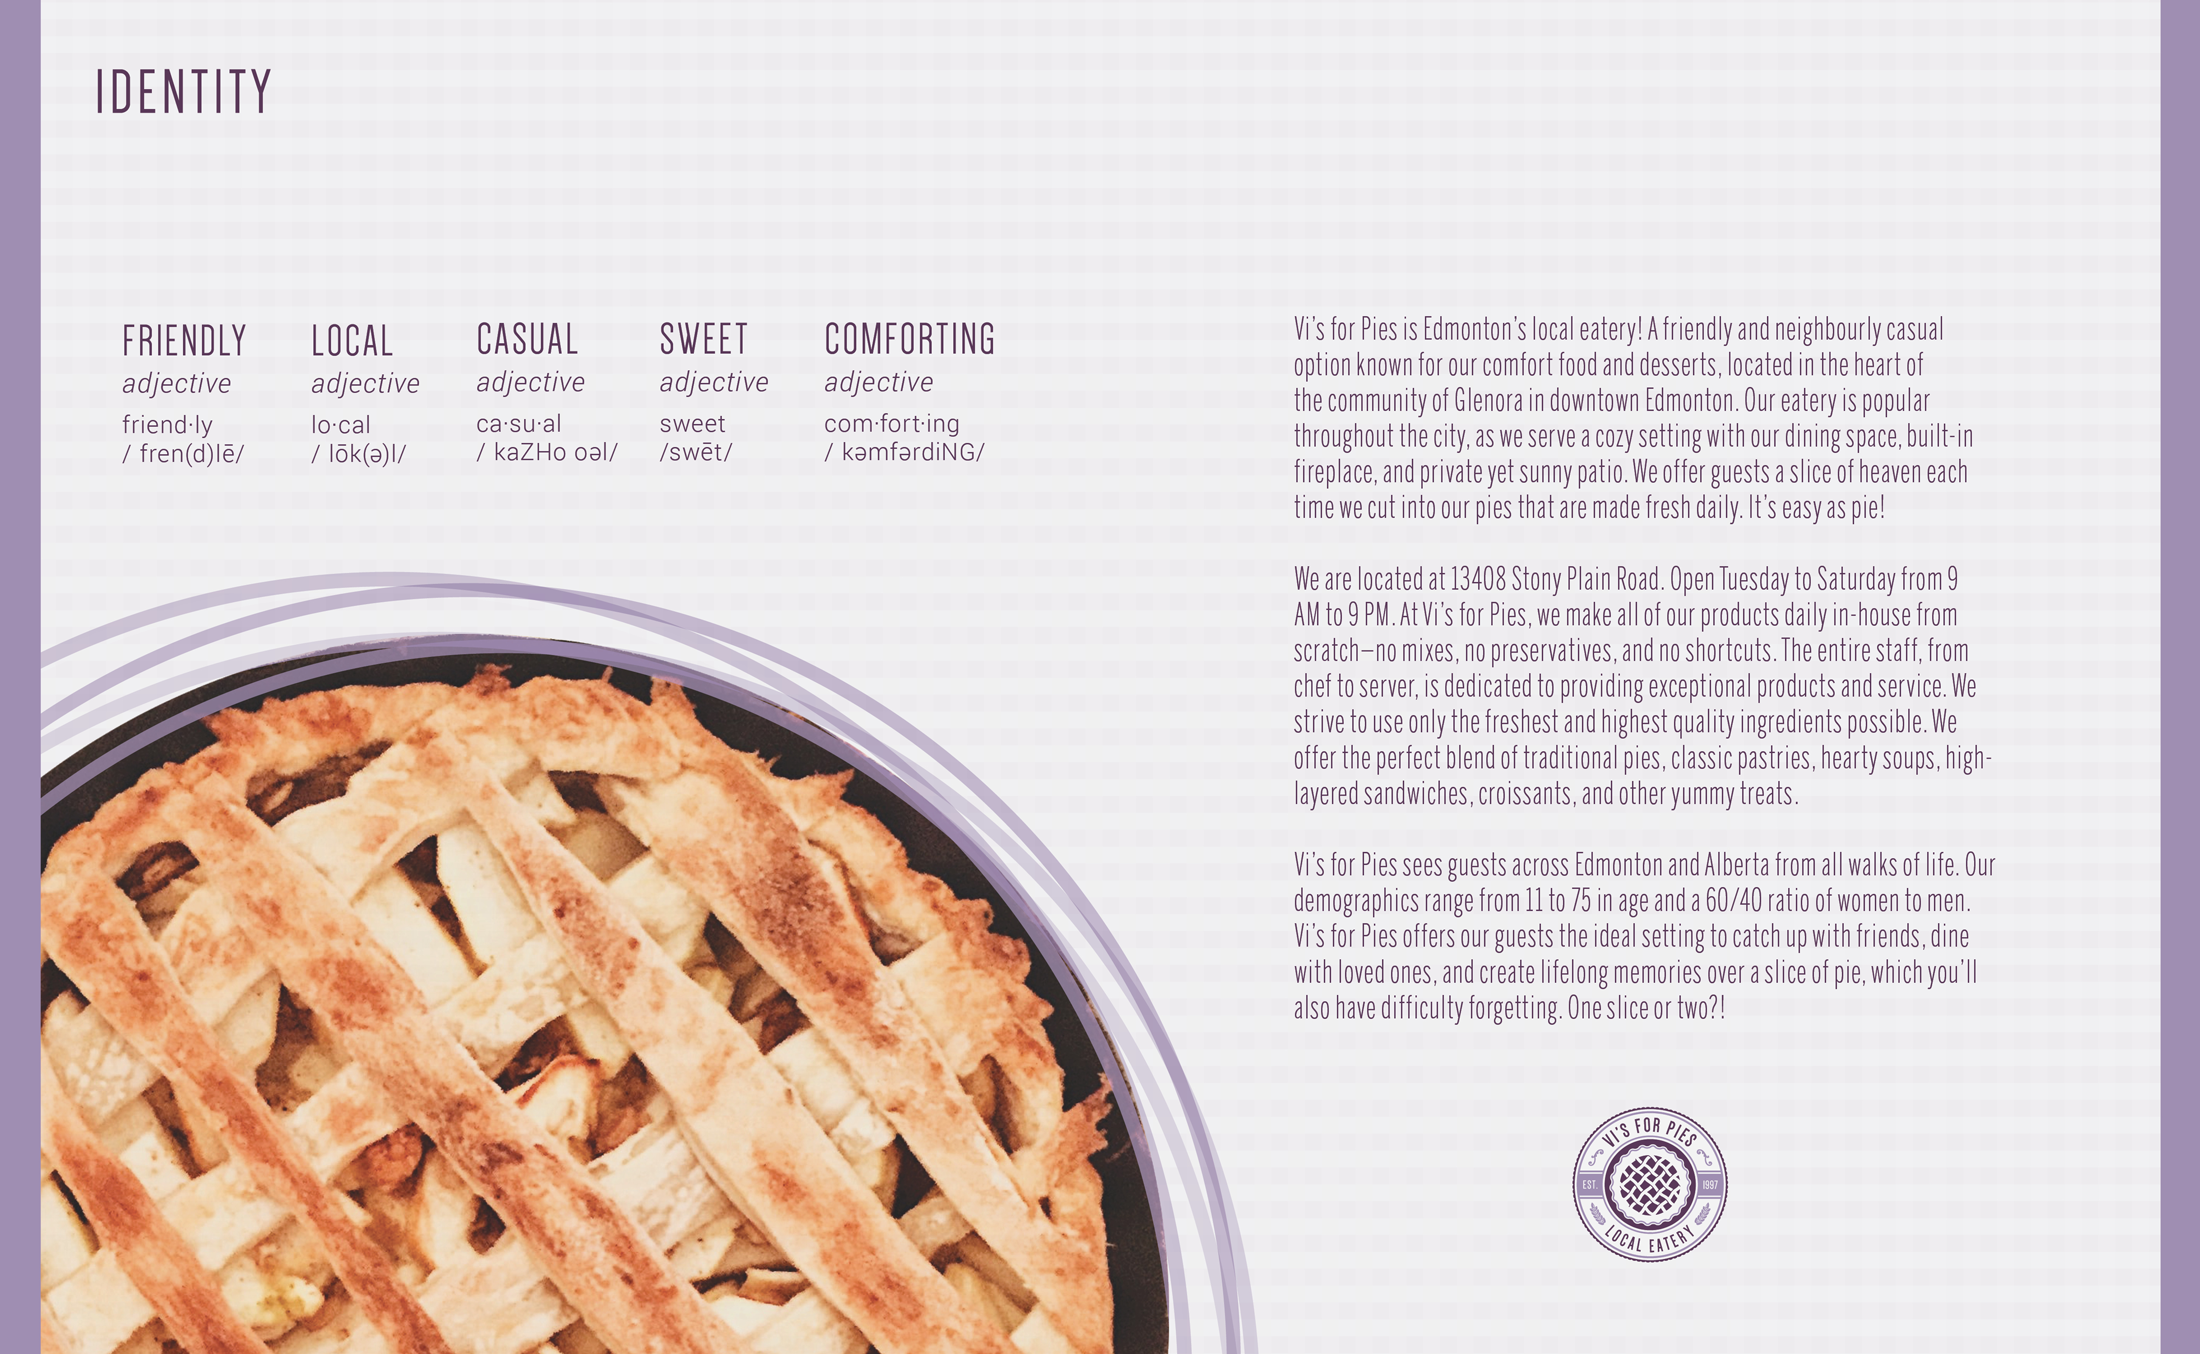 Vi’s for Pies Brand Redesign - Corporate ID & Branding - Image 2